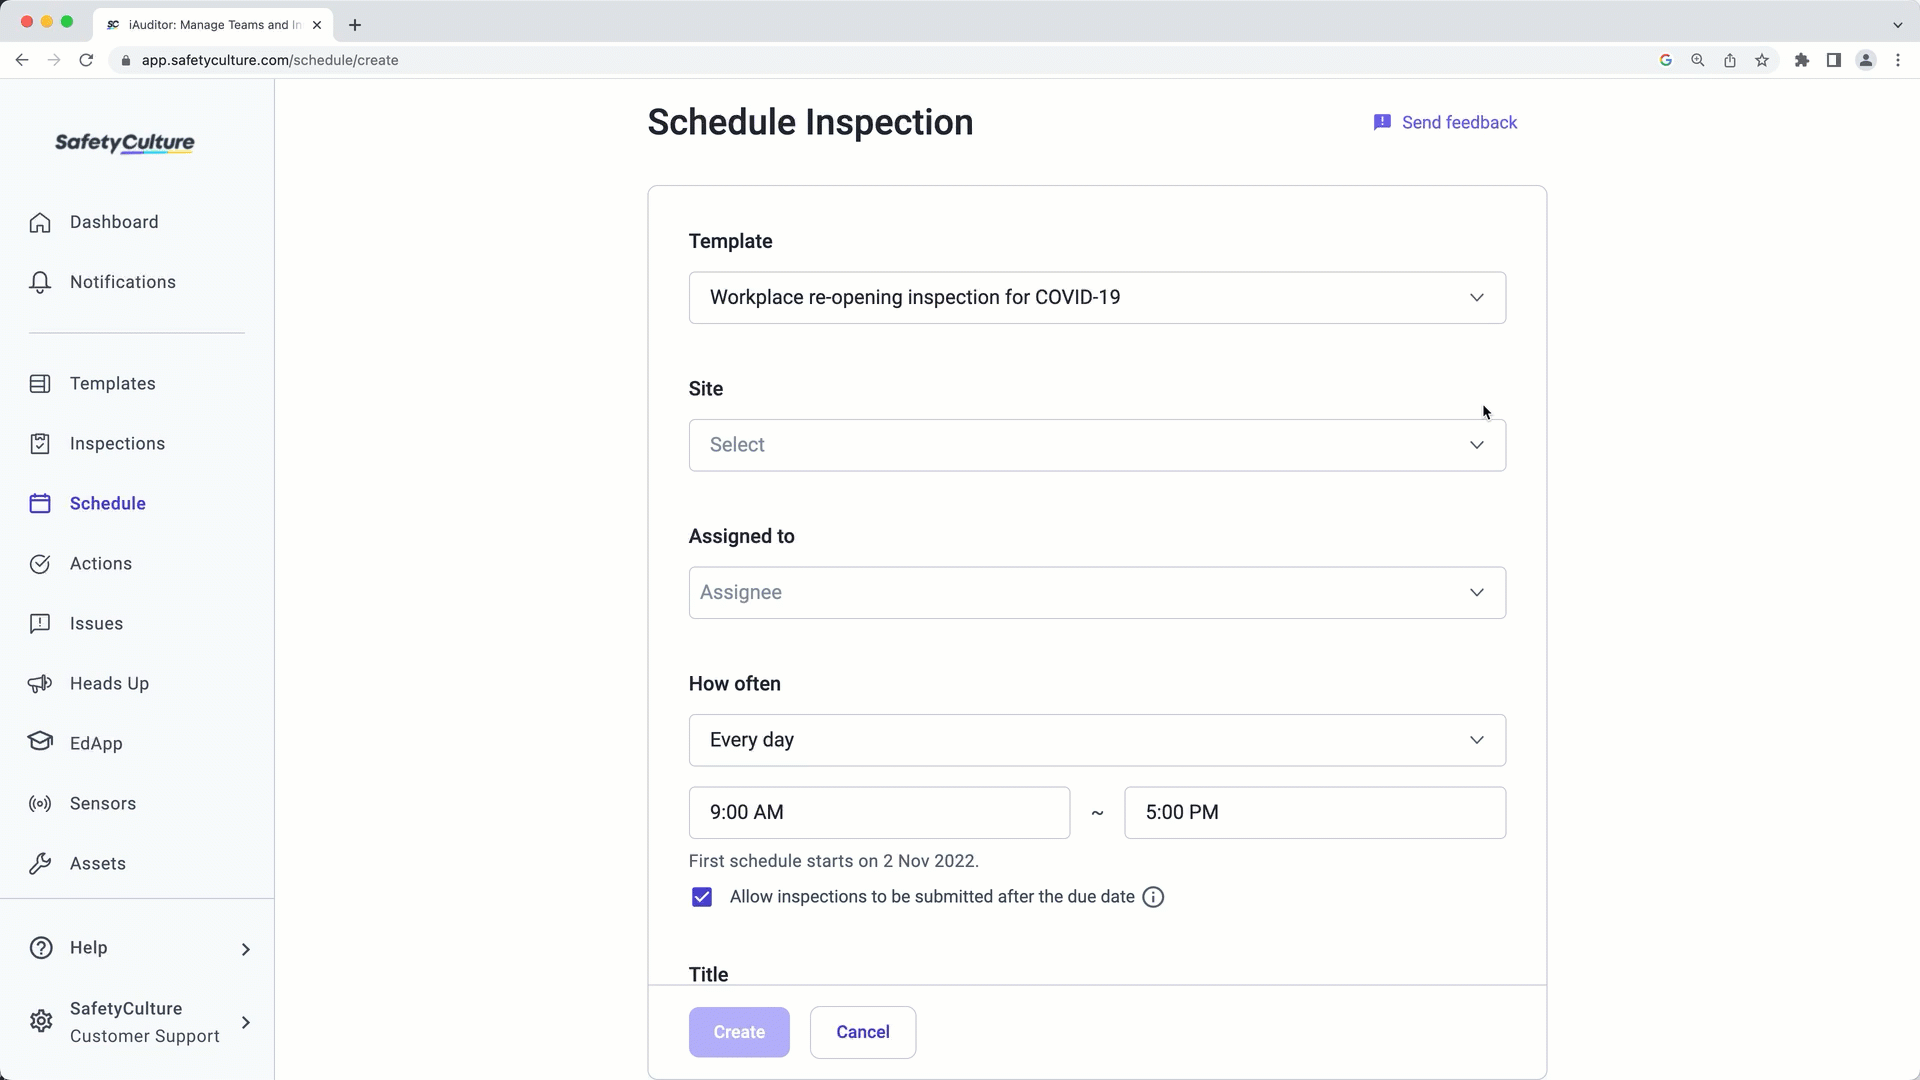 Select a site or higher levels when creating a schedule inspection via the web app.